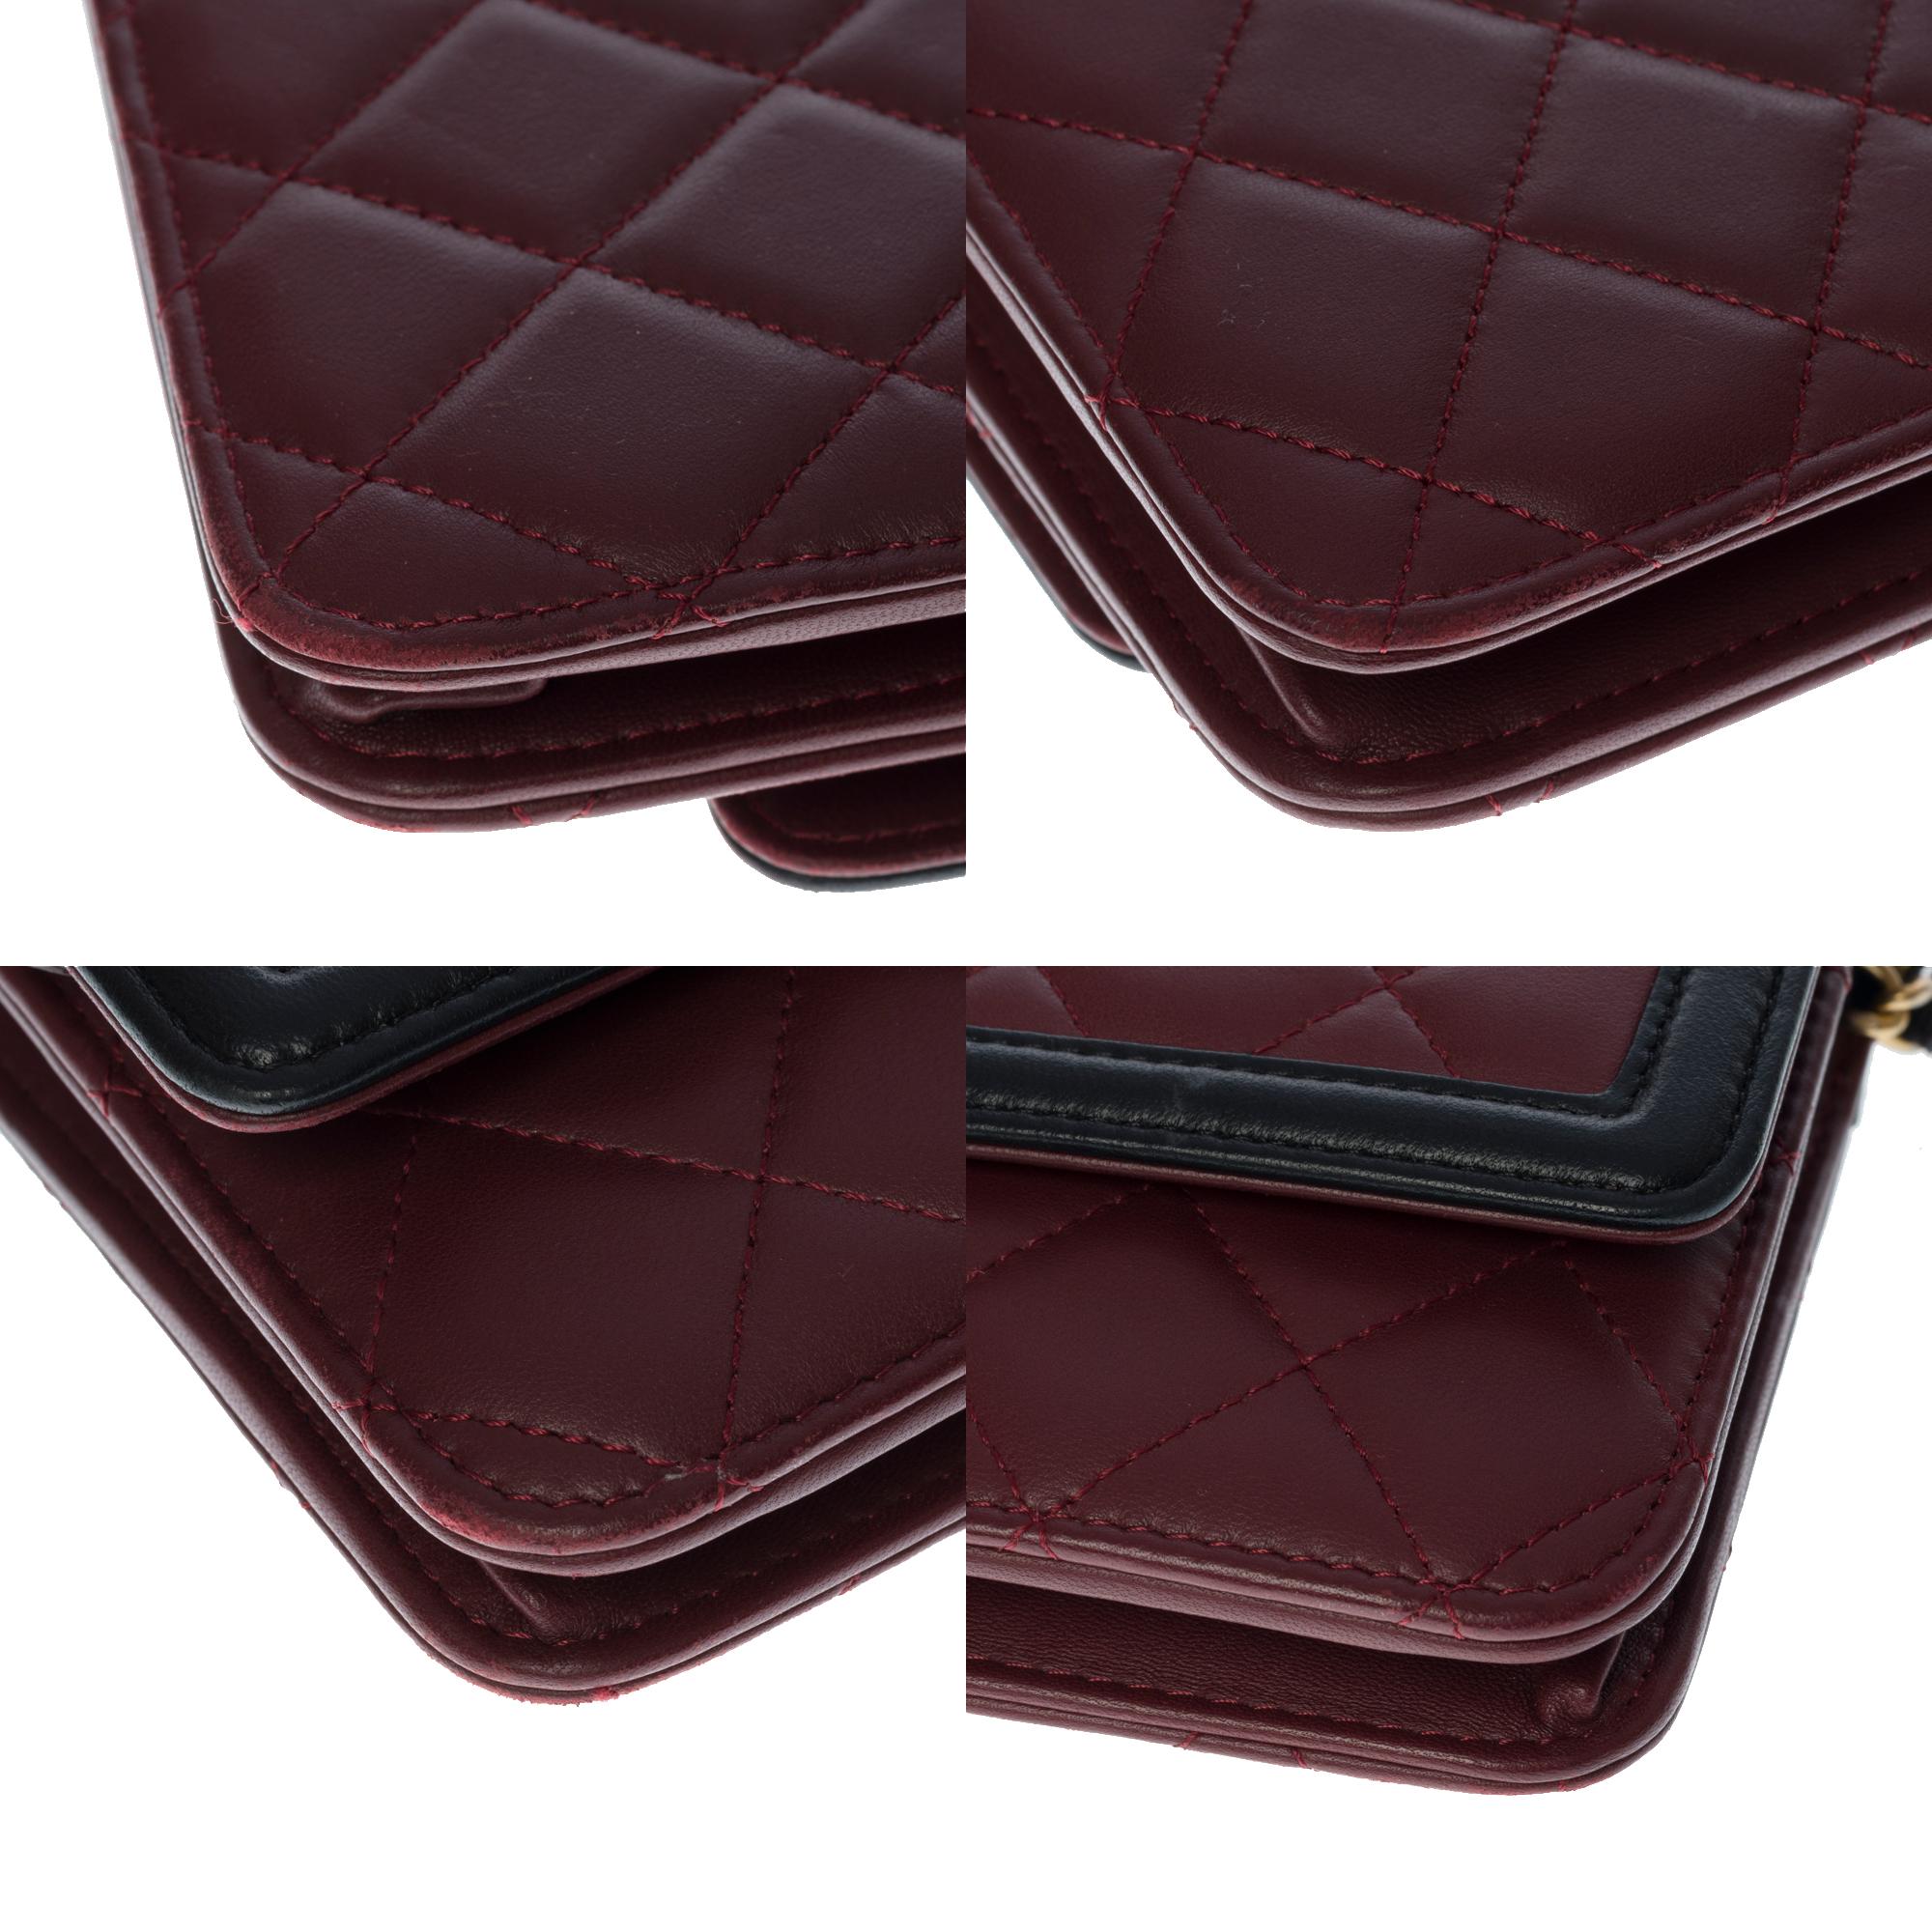 Chanel Wallet on Chain shoulder bag in burgundy/black quilted leather, GHW 2